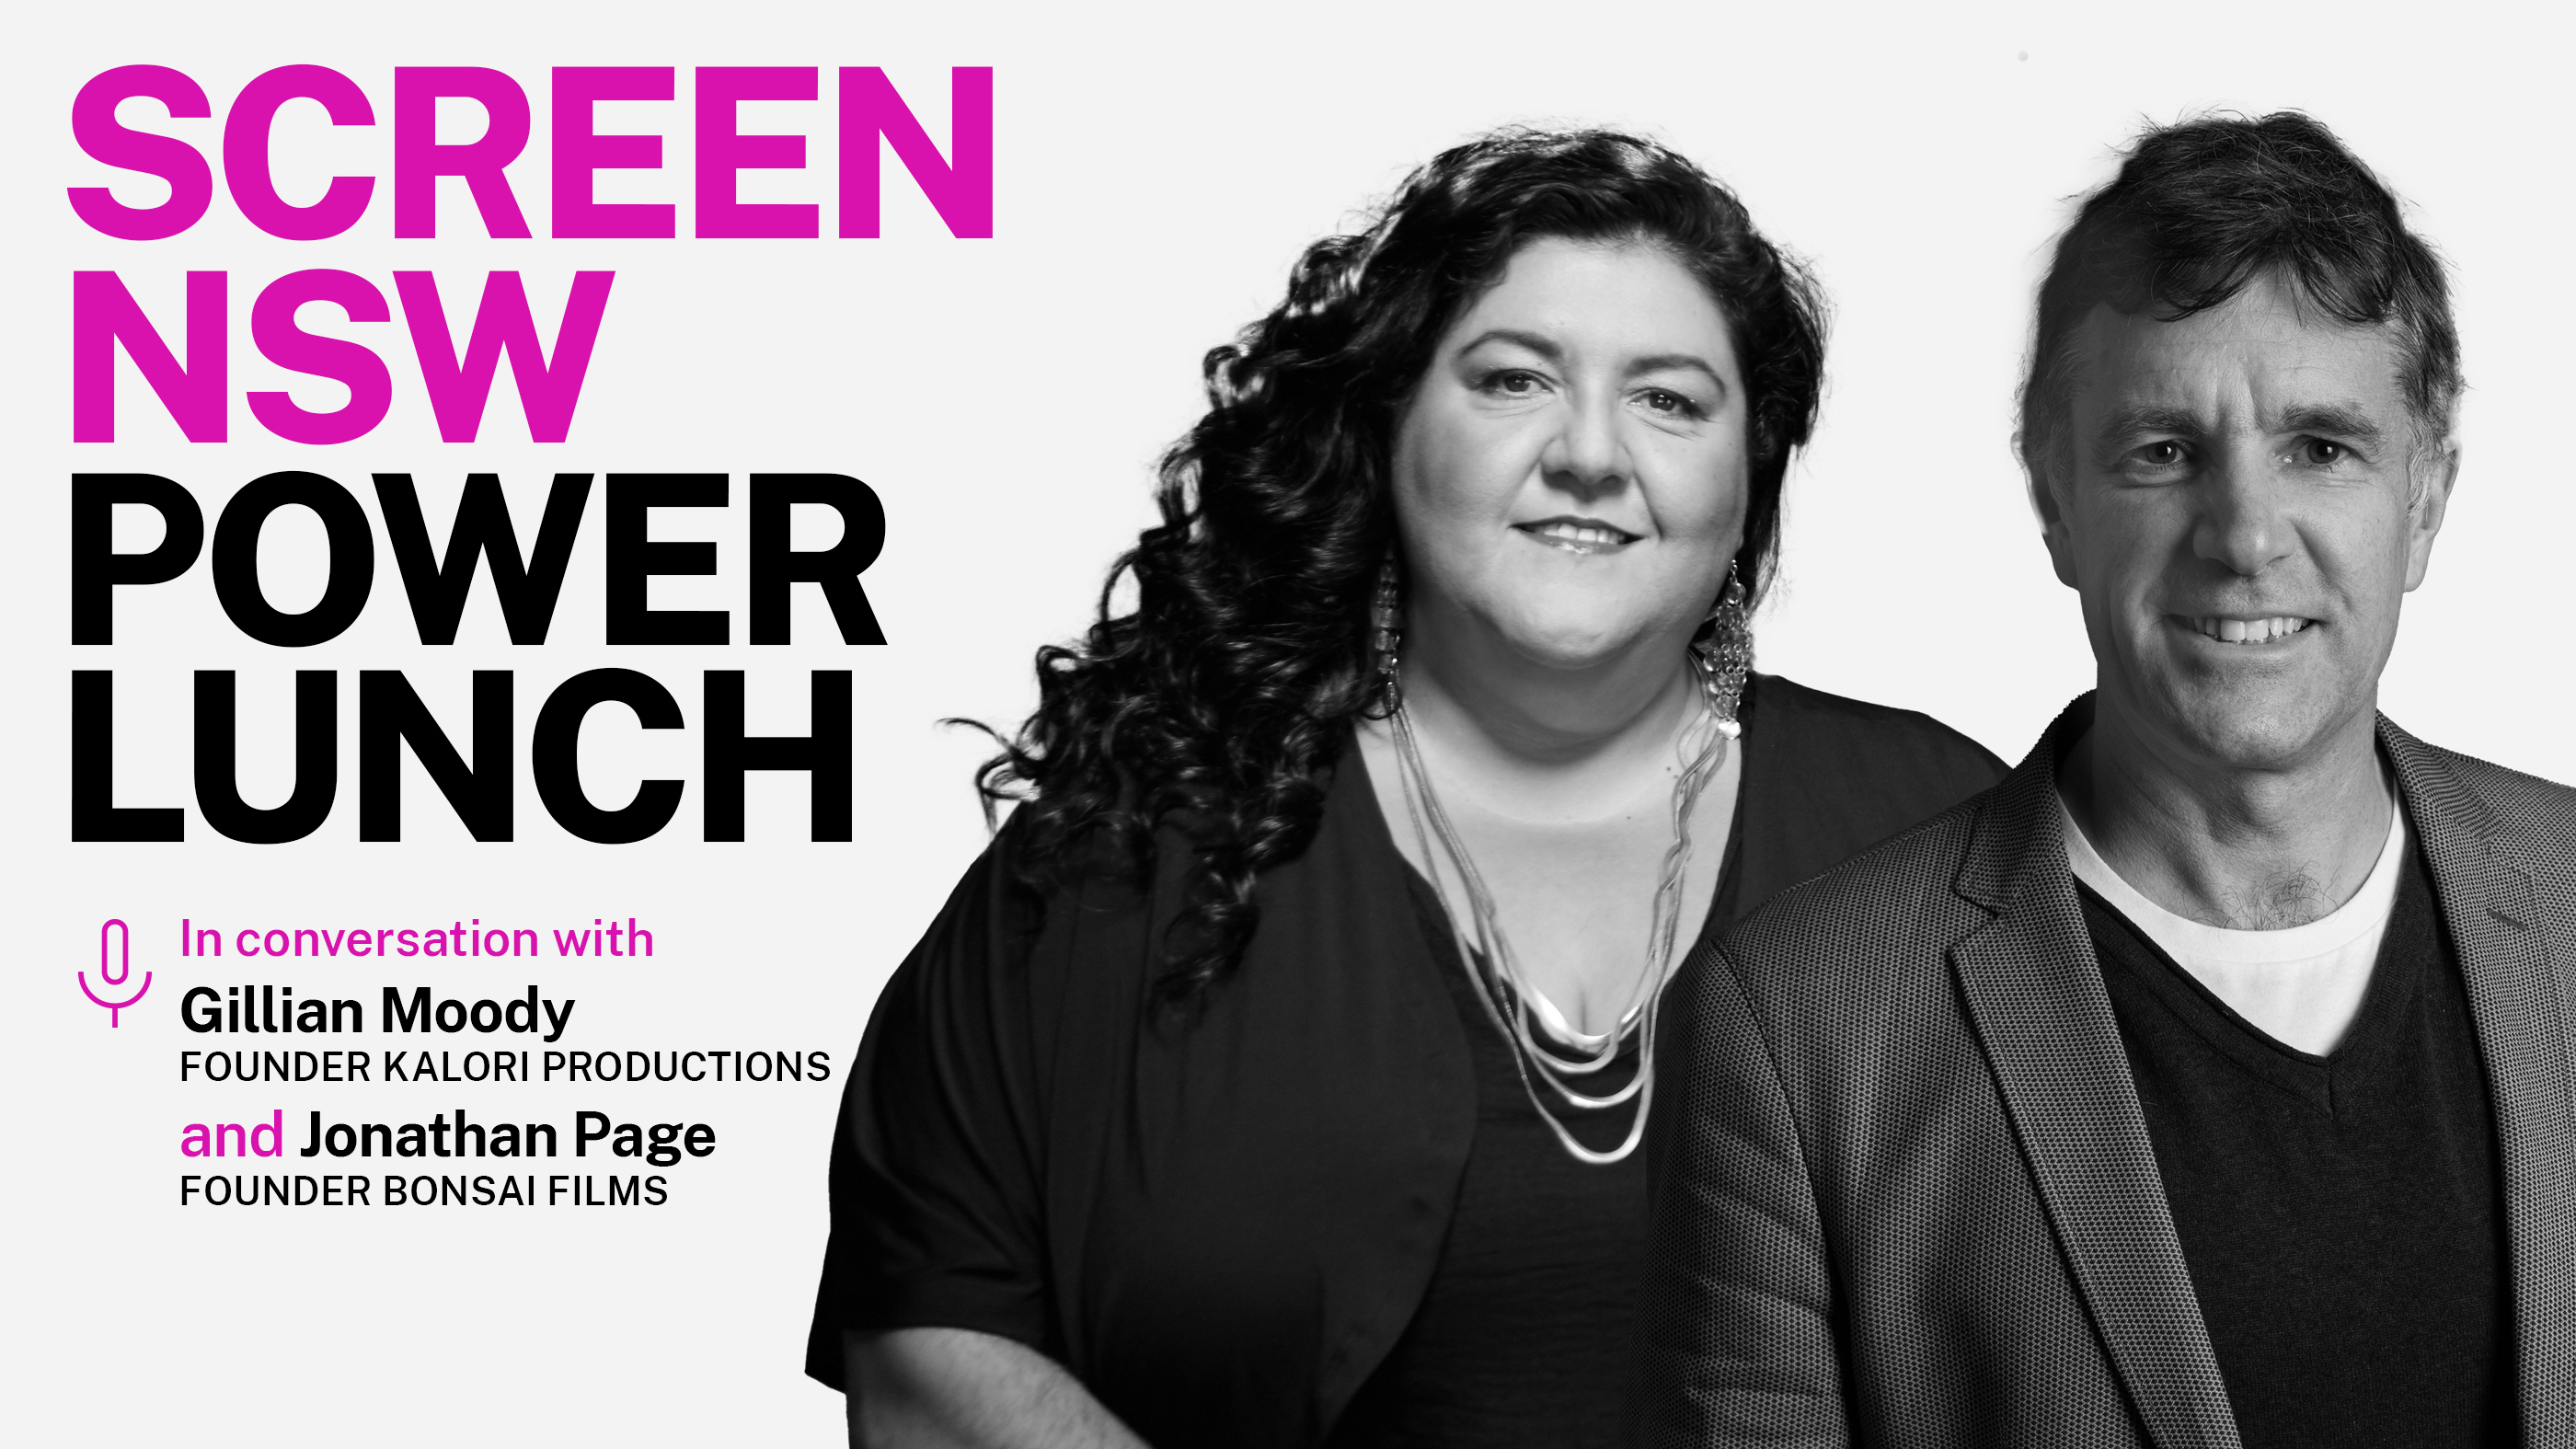 Screen NSW Power Lunch webinar: with Gillian Moody and Jonathan Page